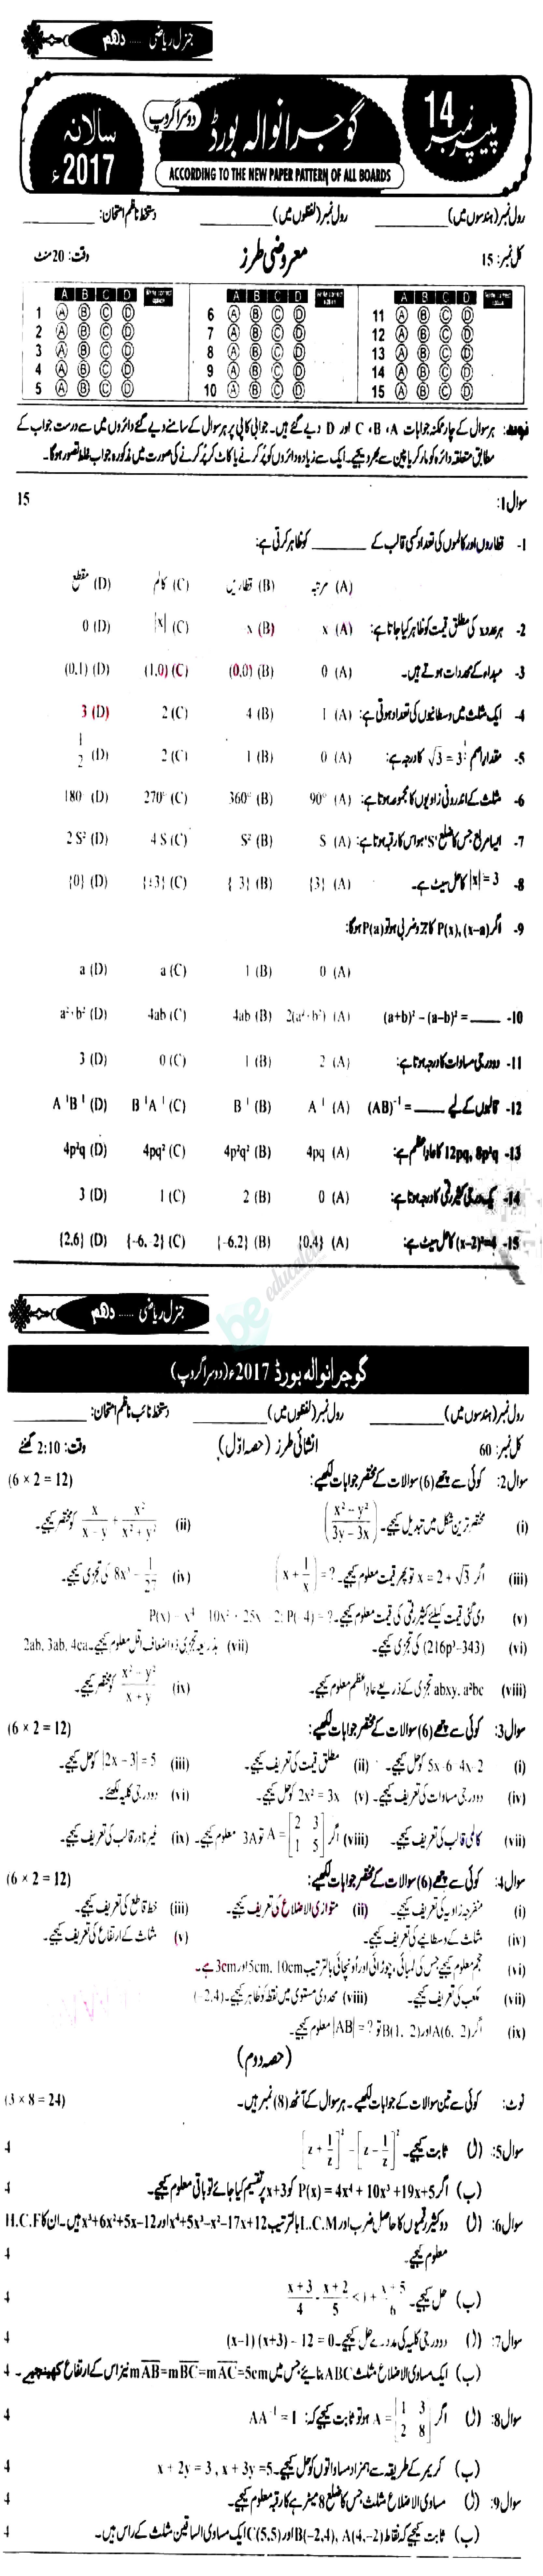 General Math 10th class Past Paper Group 2 BISE Gujranwala 2018